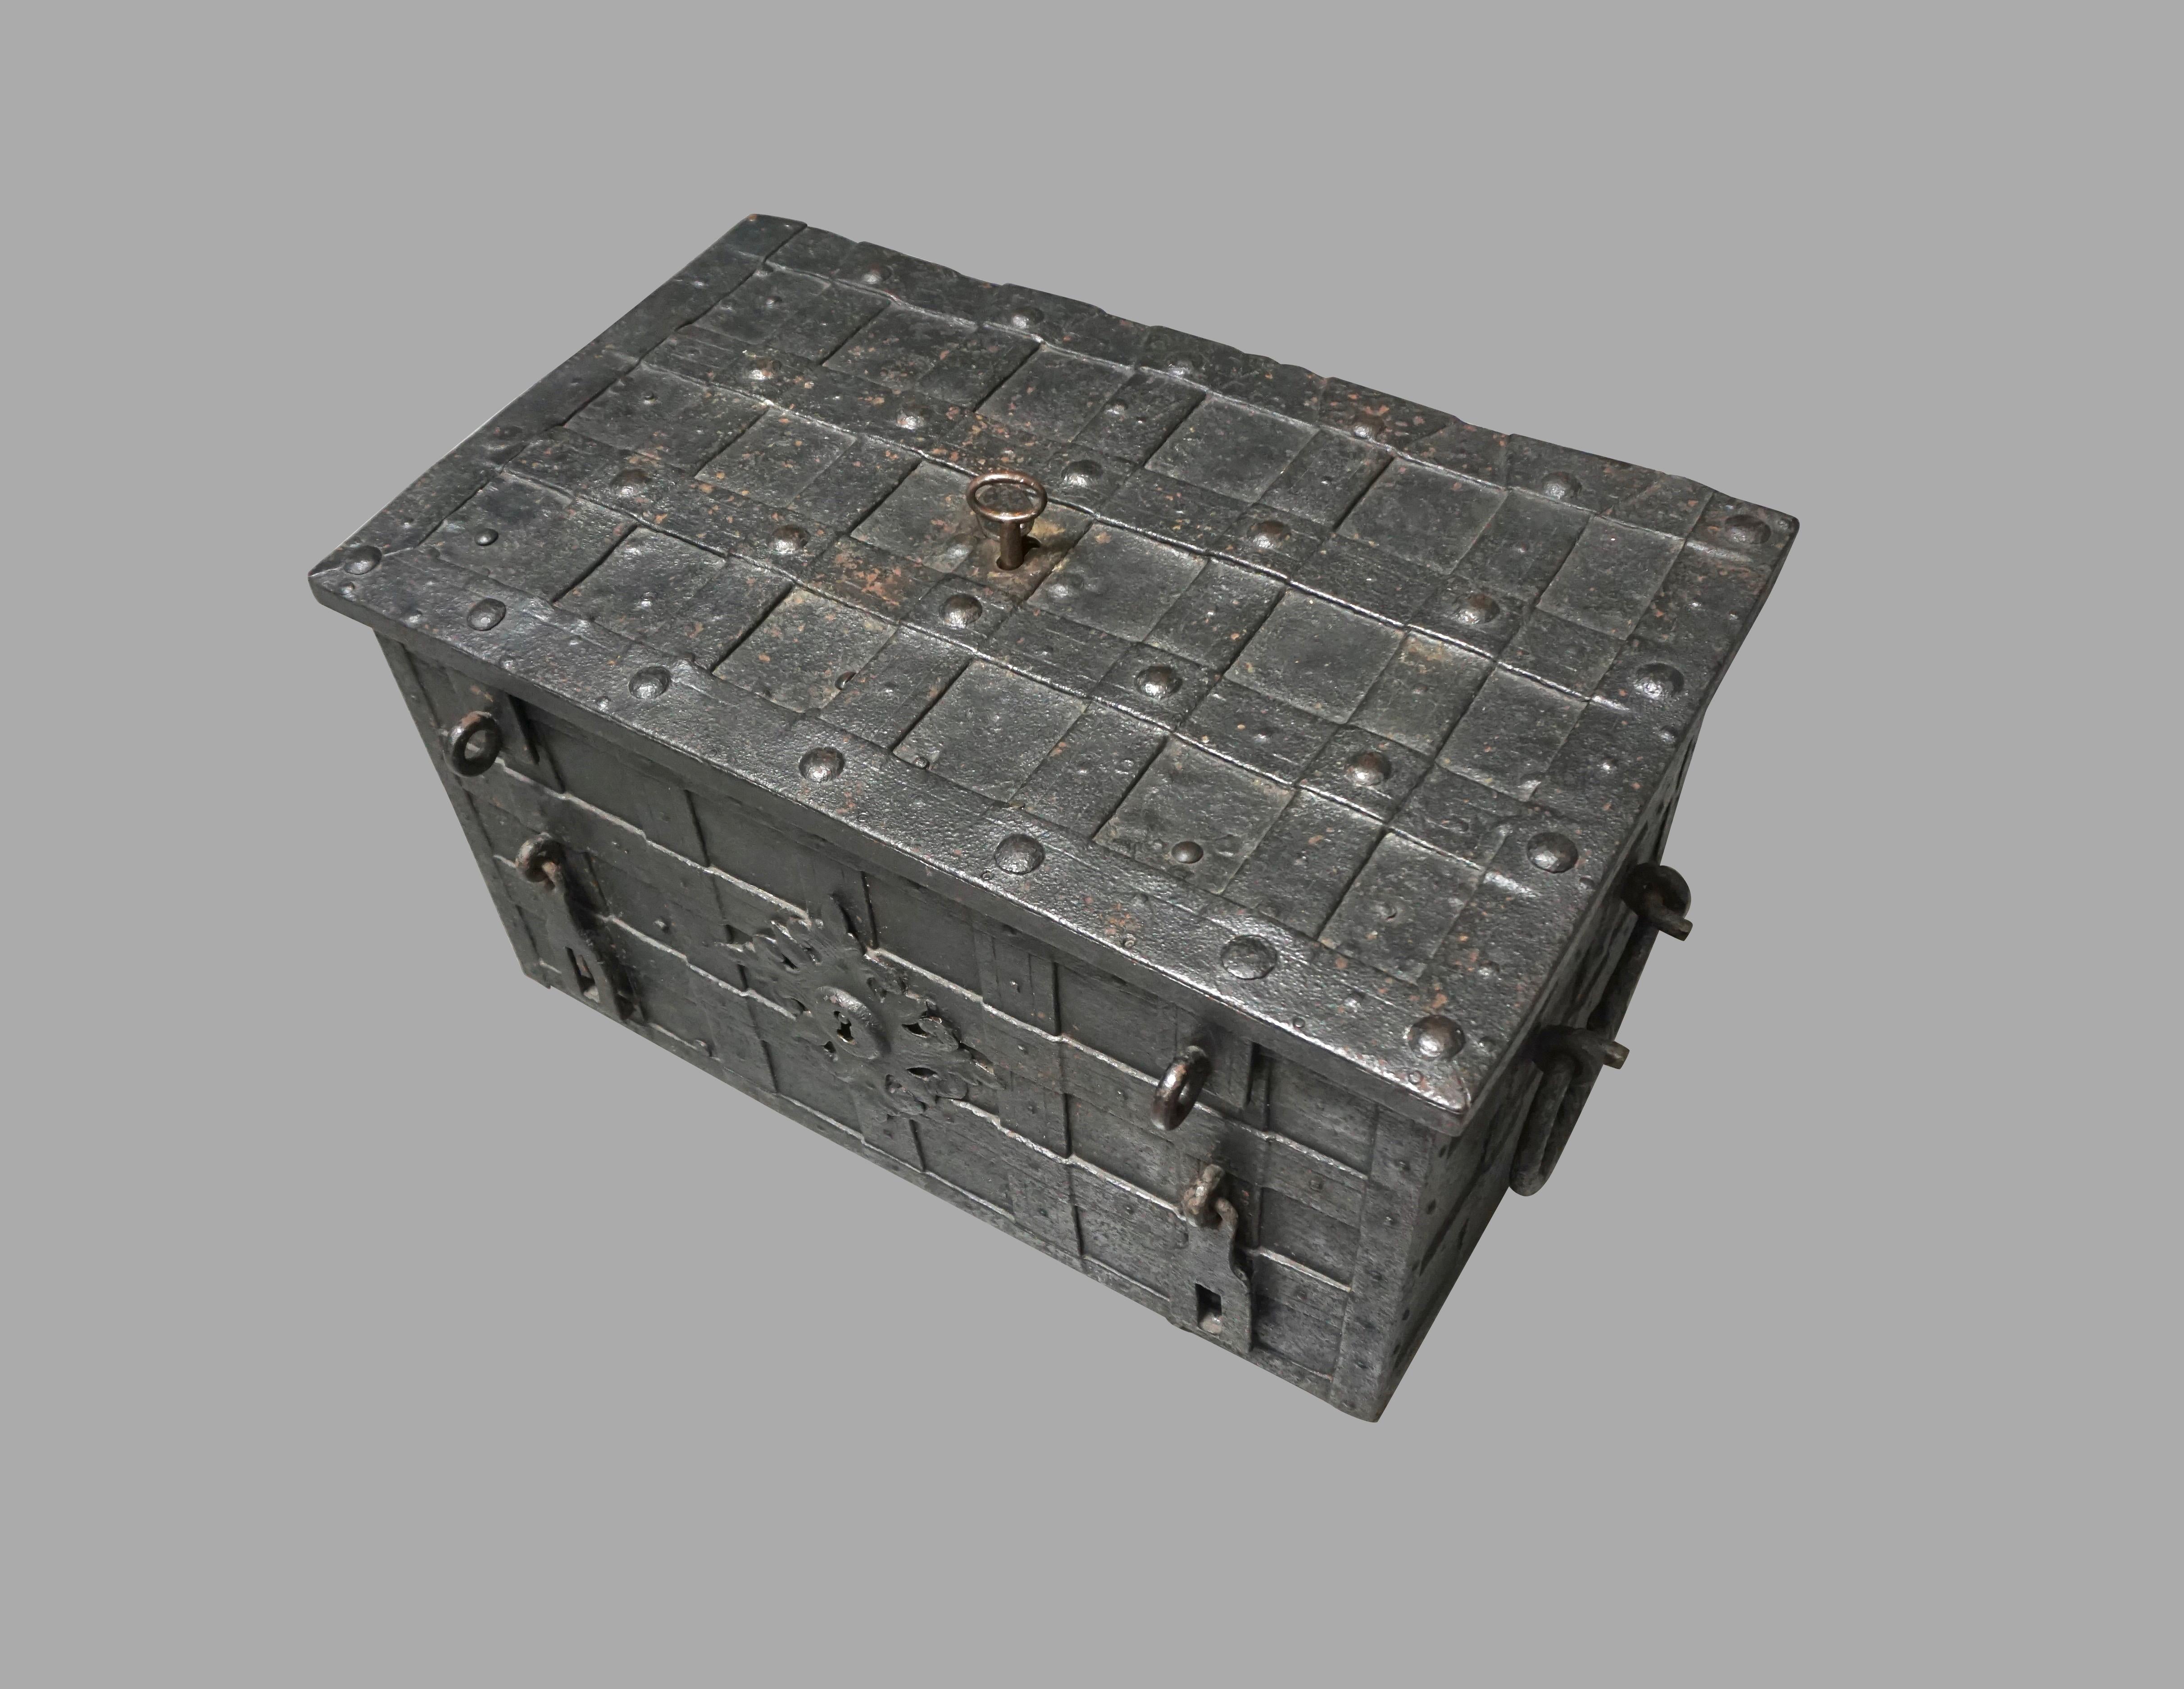 A good German (Nuremberg) late 17th century or early 18th century wrought iron armada chest of rectangular form, bound with riveted strapwork and bale handles to each side, retaining an elaborate and functional locking mechanism with an engraved